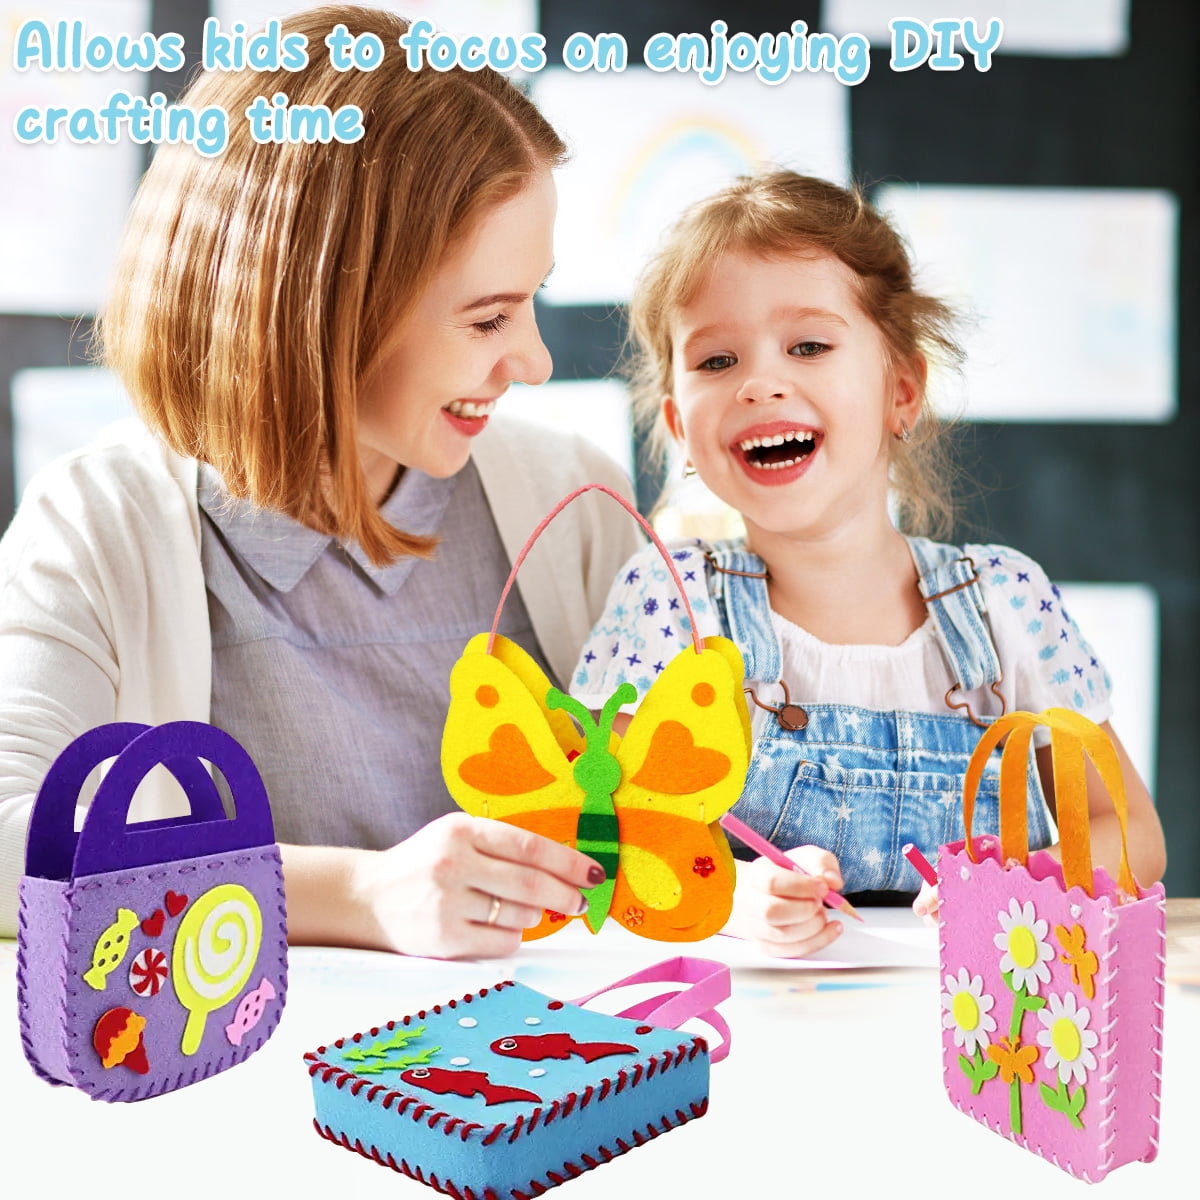  Toyvian 4 Sets Learn to Sew Your Own Purses, Sewing Kit for Kids  Girls Craft Gifts DIY Sewing Craft Supplies for Kids : Toys & Games